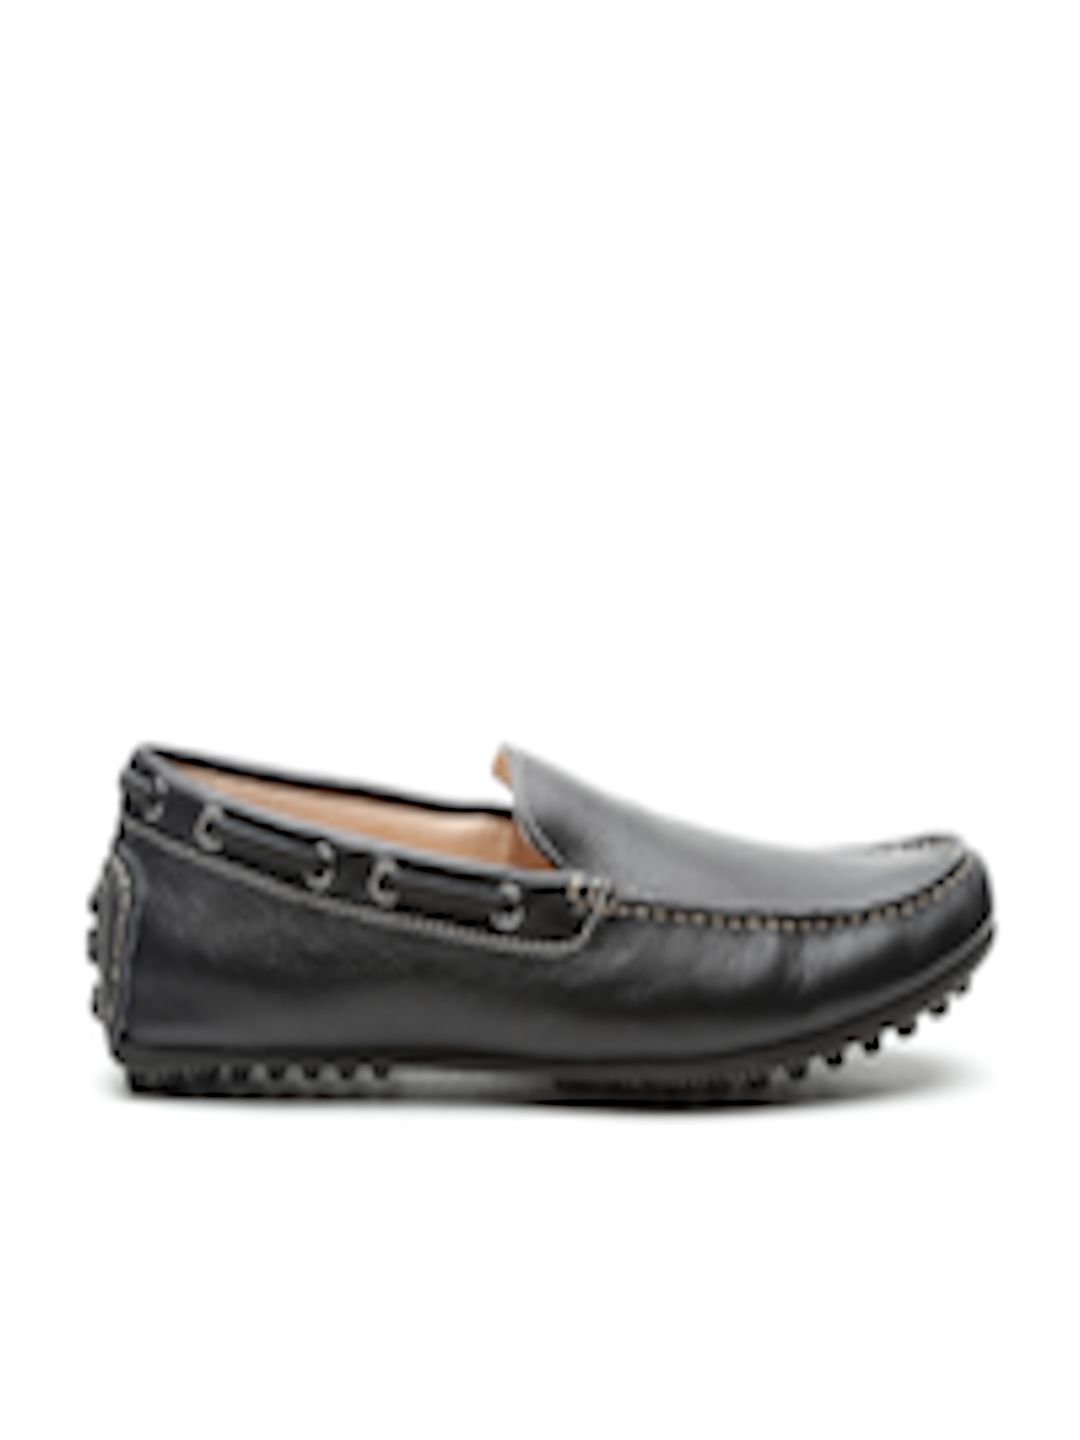 Buy JOHNSTON & MURPHY Men Black Leather Driving Shoes - Casual Shoes ...